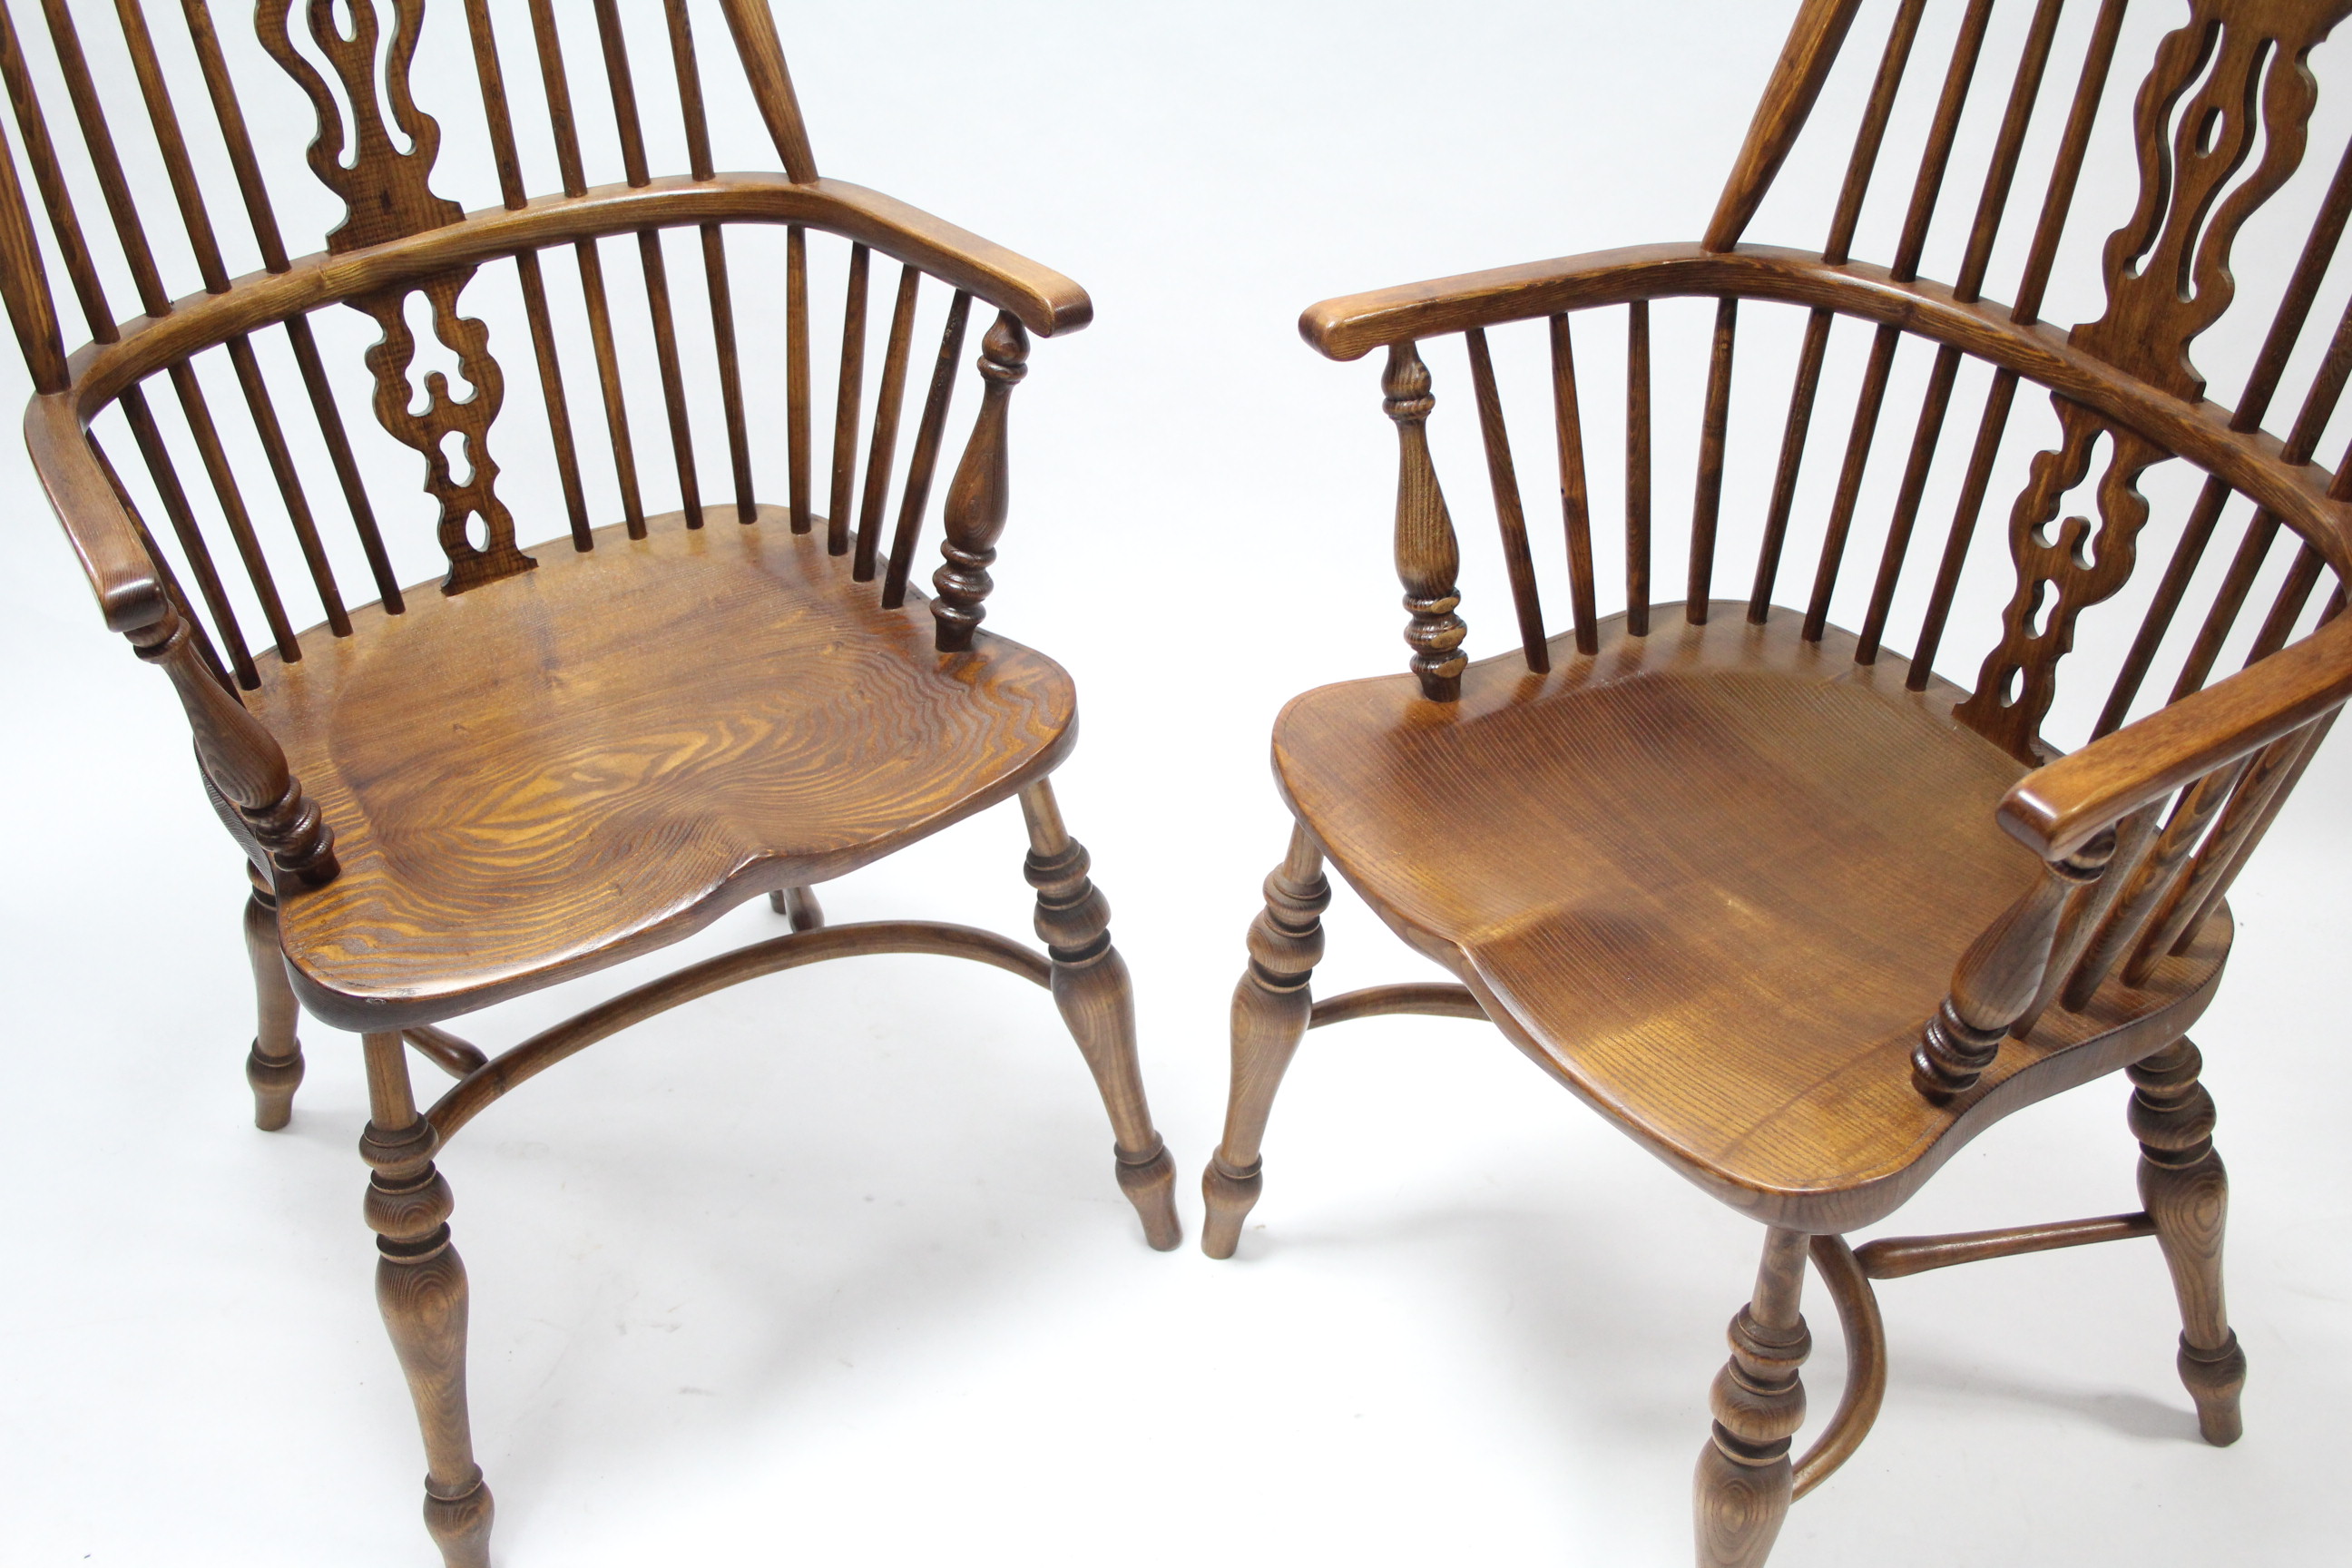 GOOD QUALITY SET OF SIX 19th CENTURY WINDSOR-STYLE DINING CHAIRS (including a pair of carvers), with - Image 5 of 7